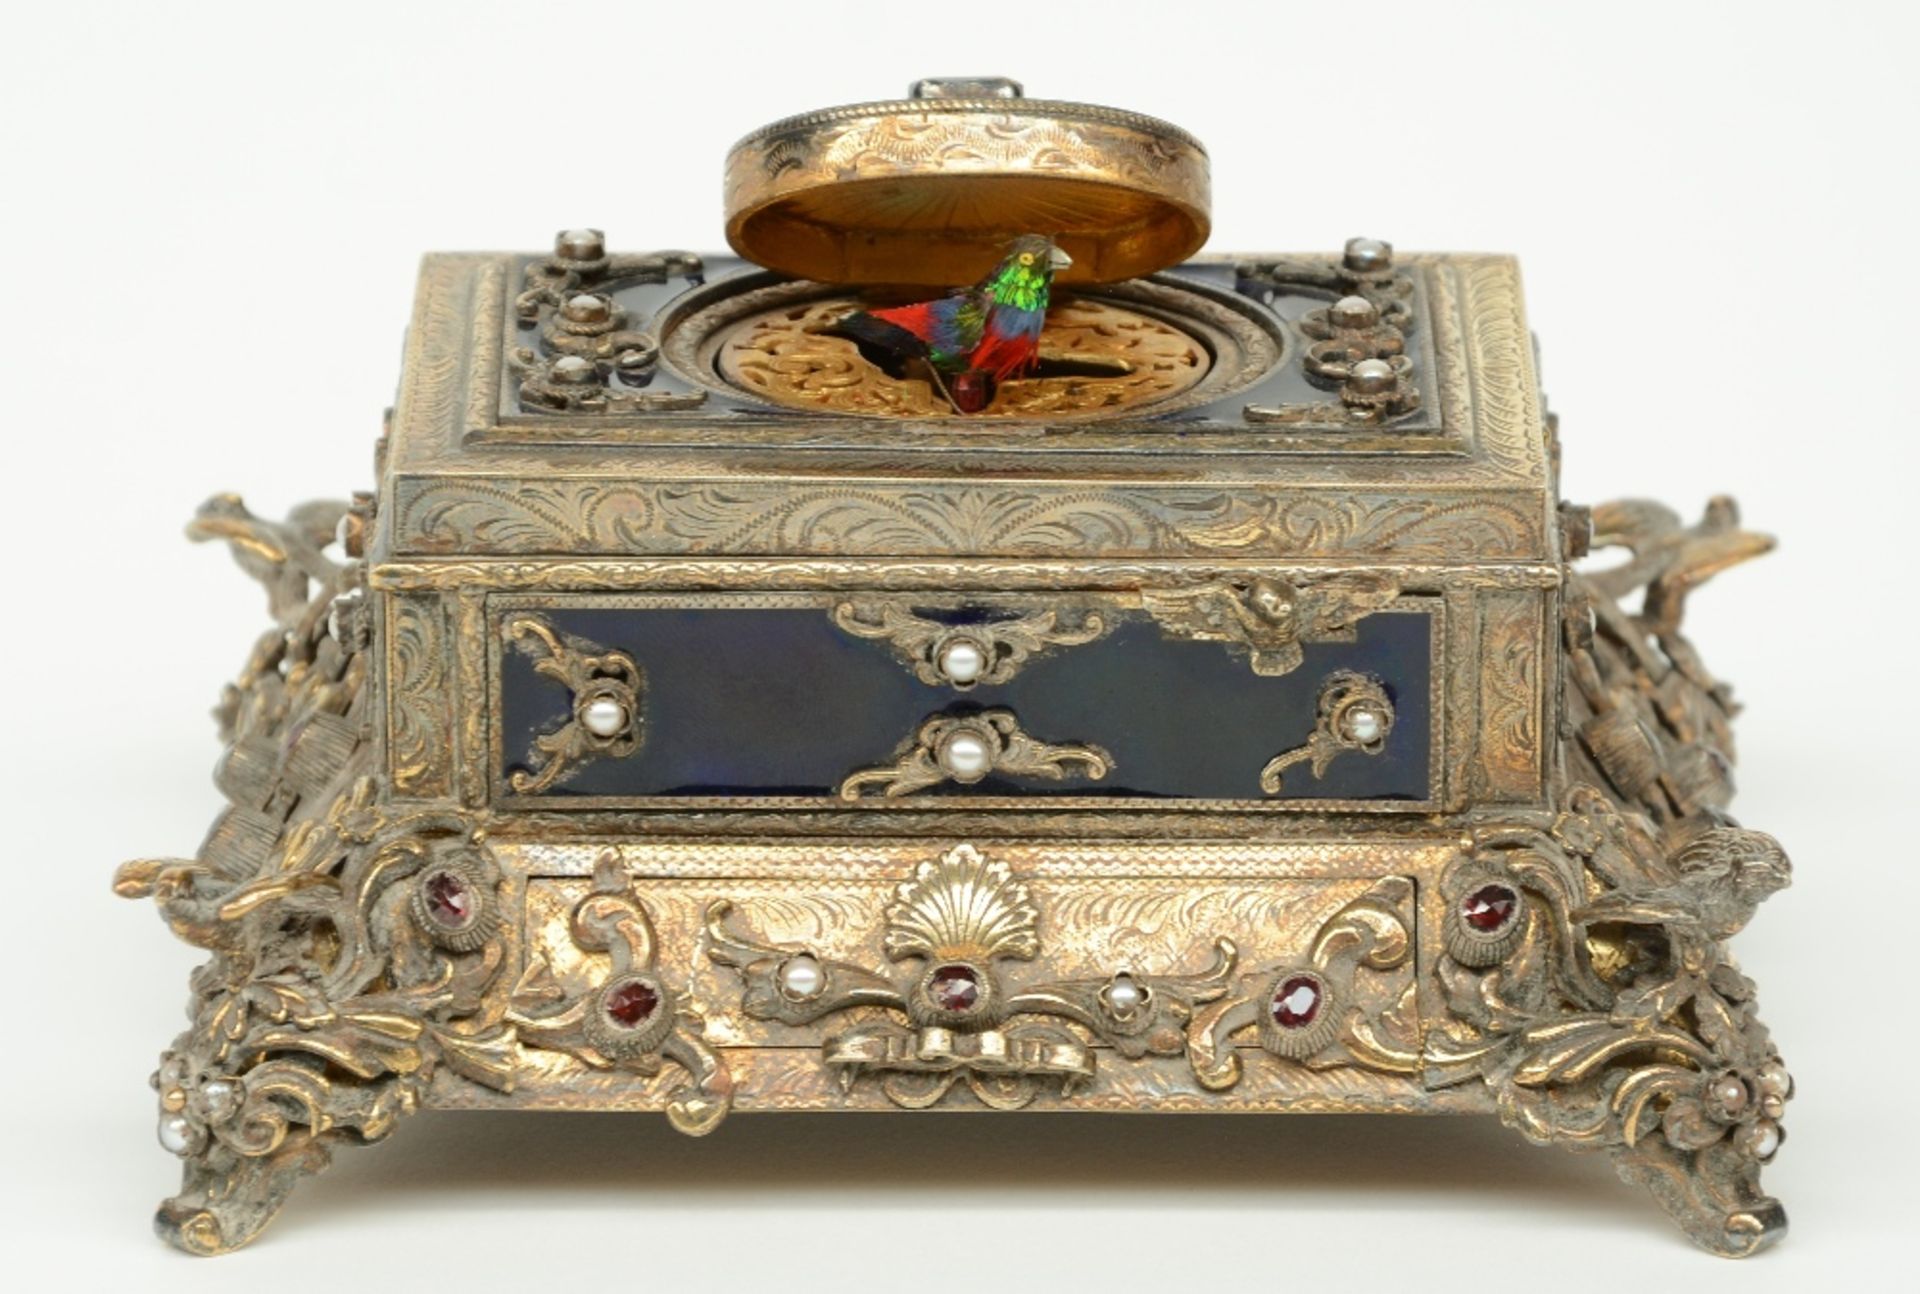 An exceptional gilt silver music box, partially cobalt blue enamelled, ruby set and inlaid with